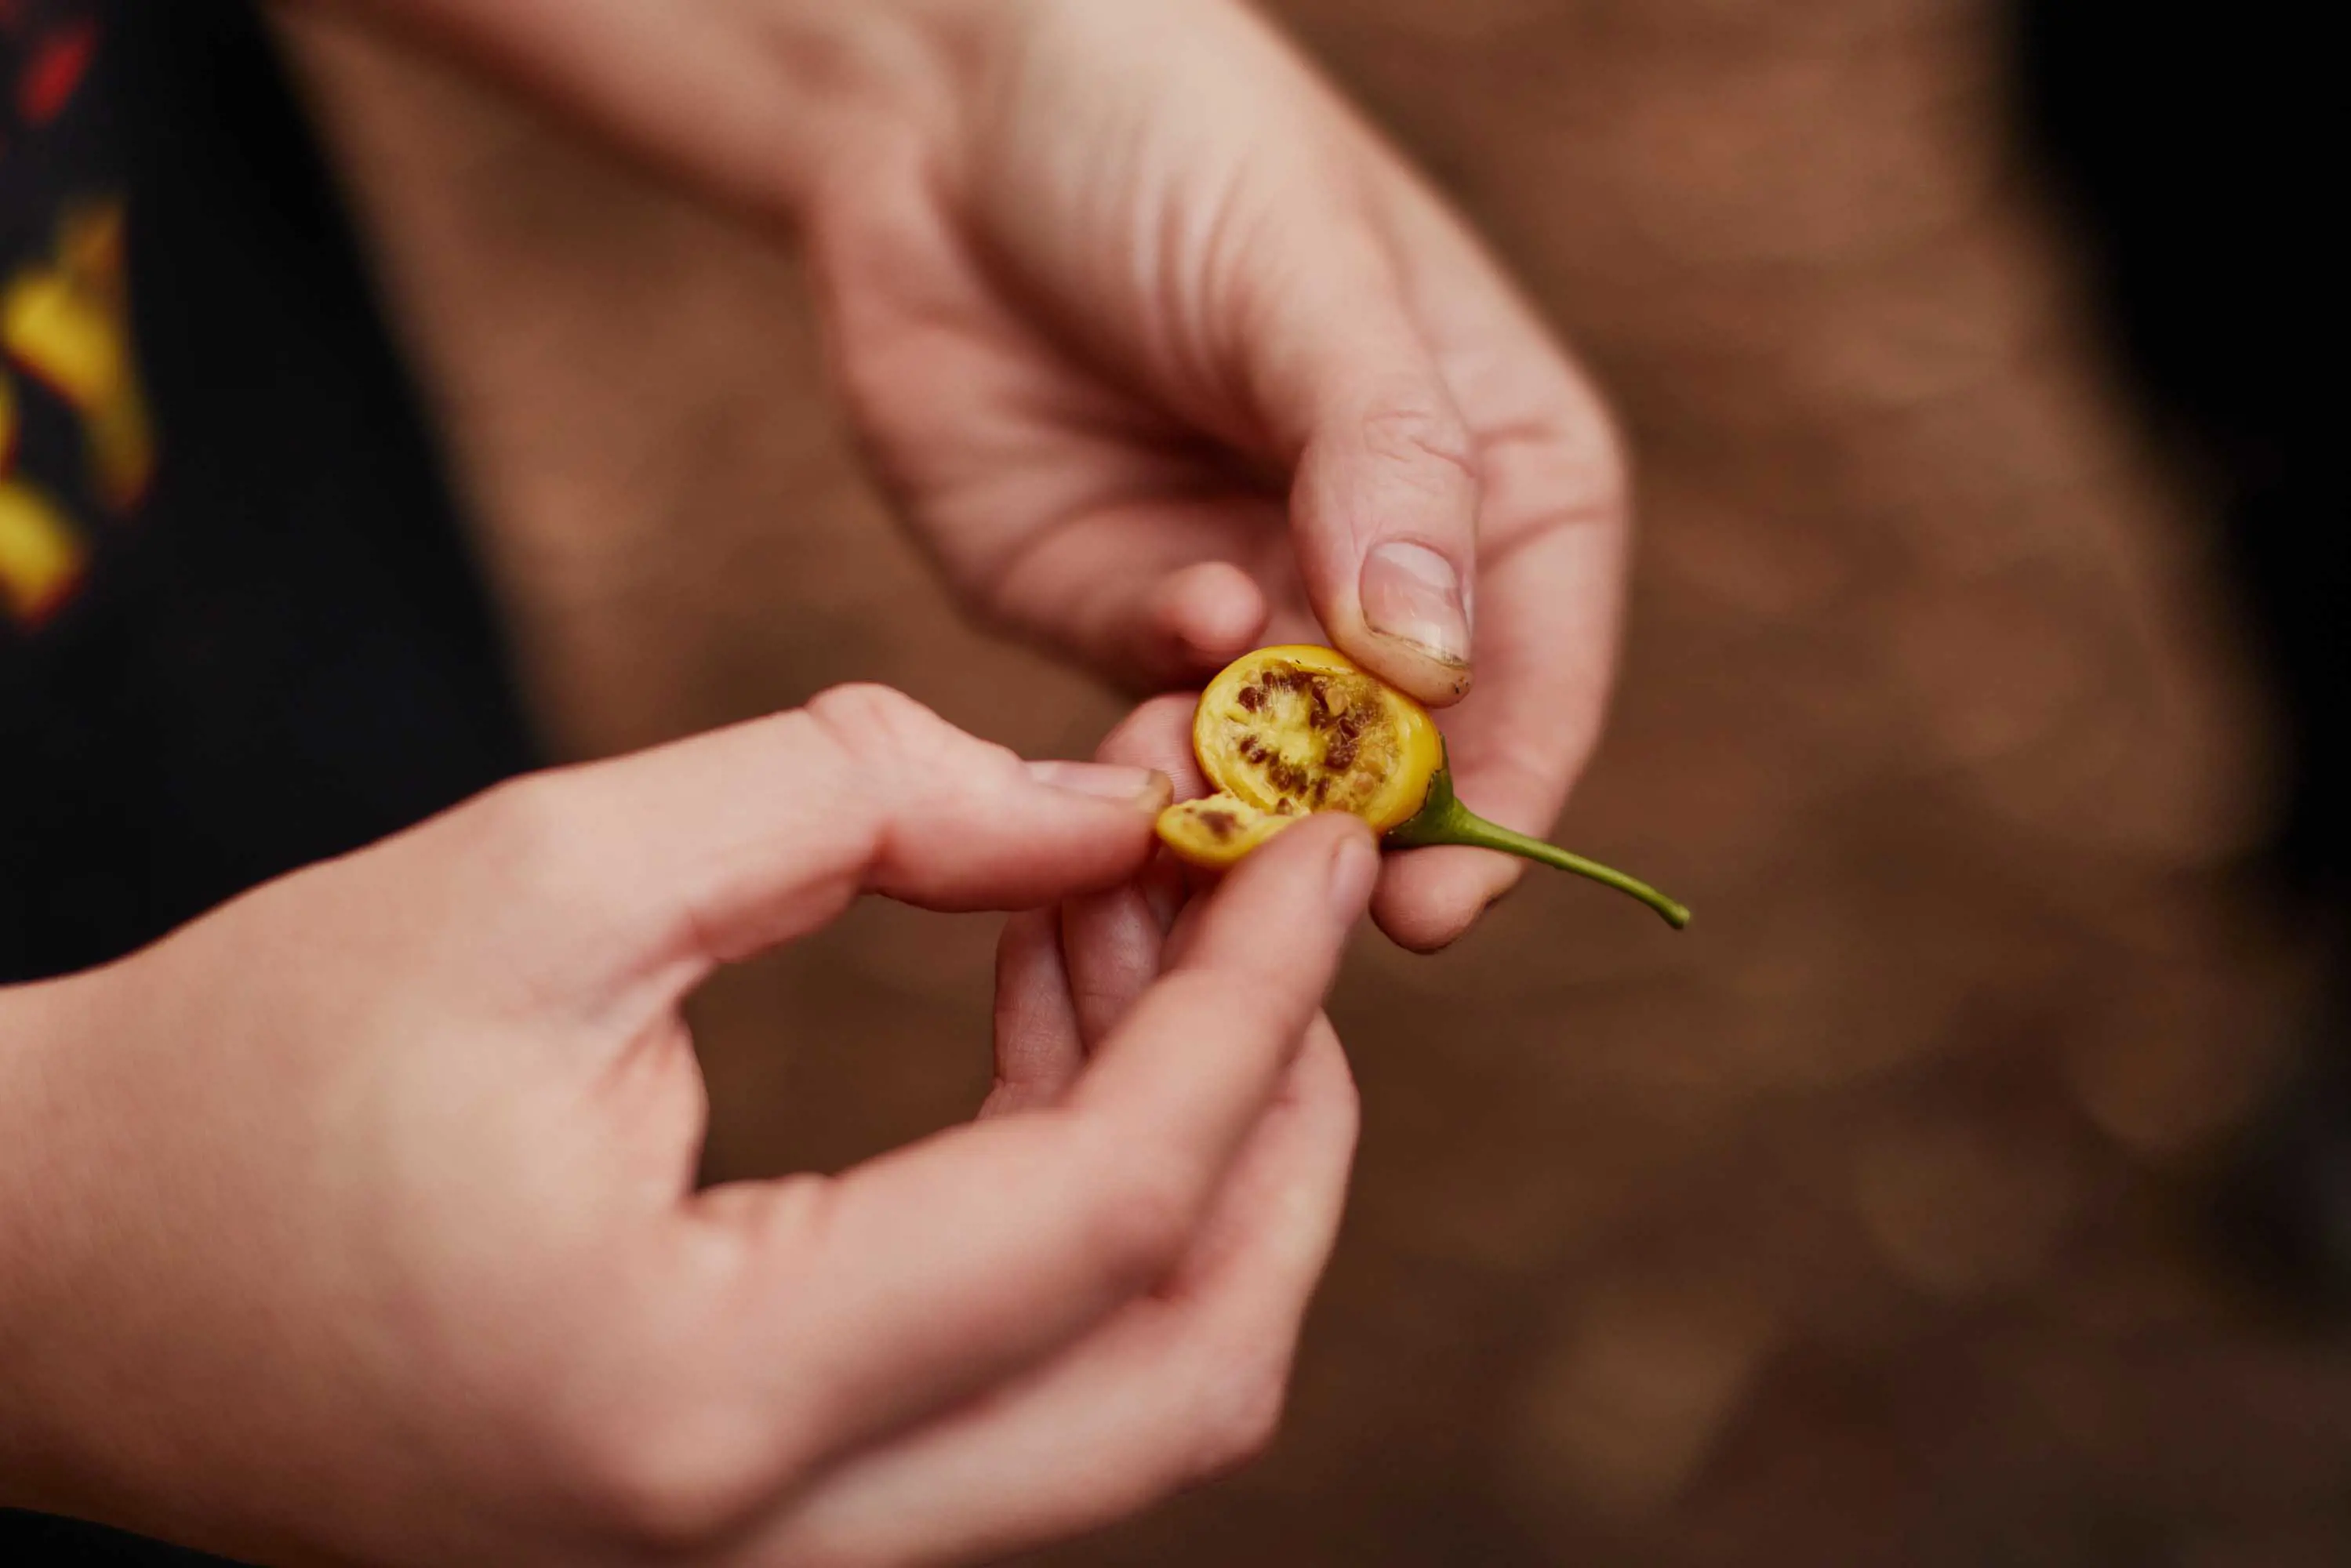 Photograph of hands carefully splitting open a small, yellow fruit filled with brown seeds.